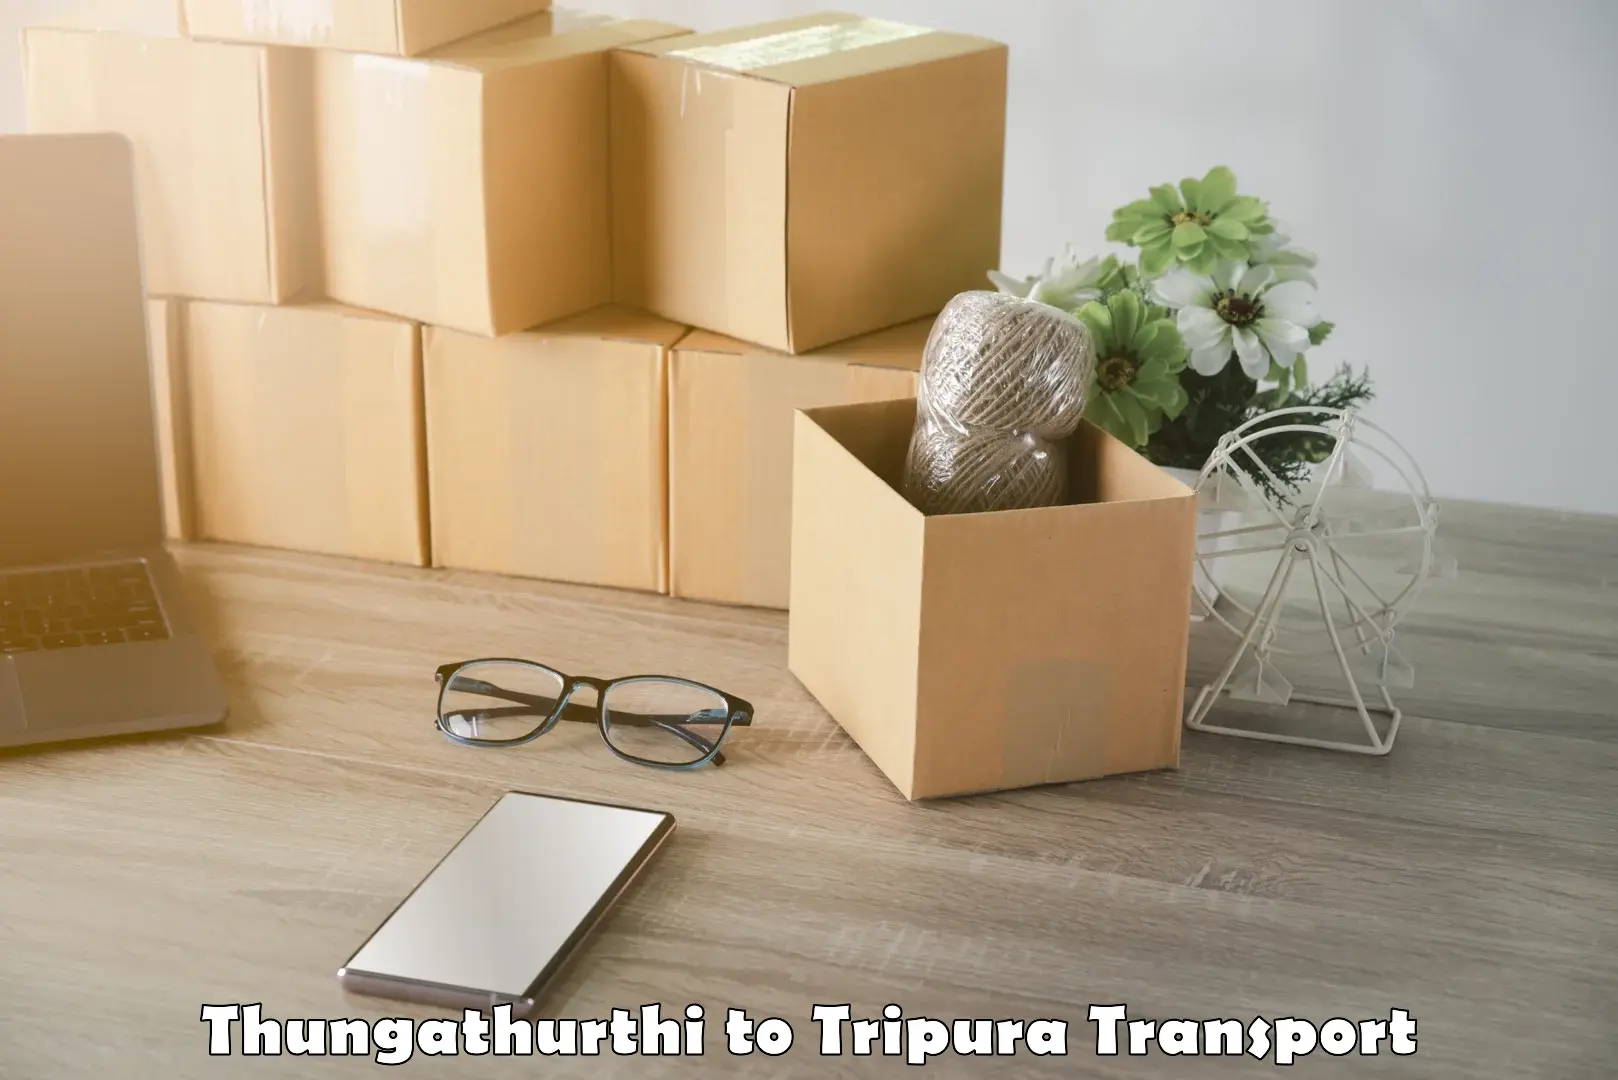 Delivery service Thungathurthi to South Tripura